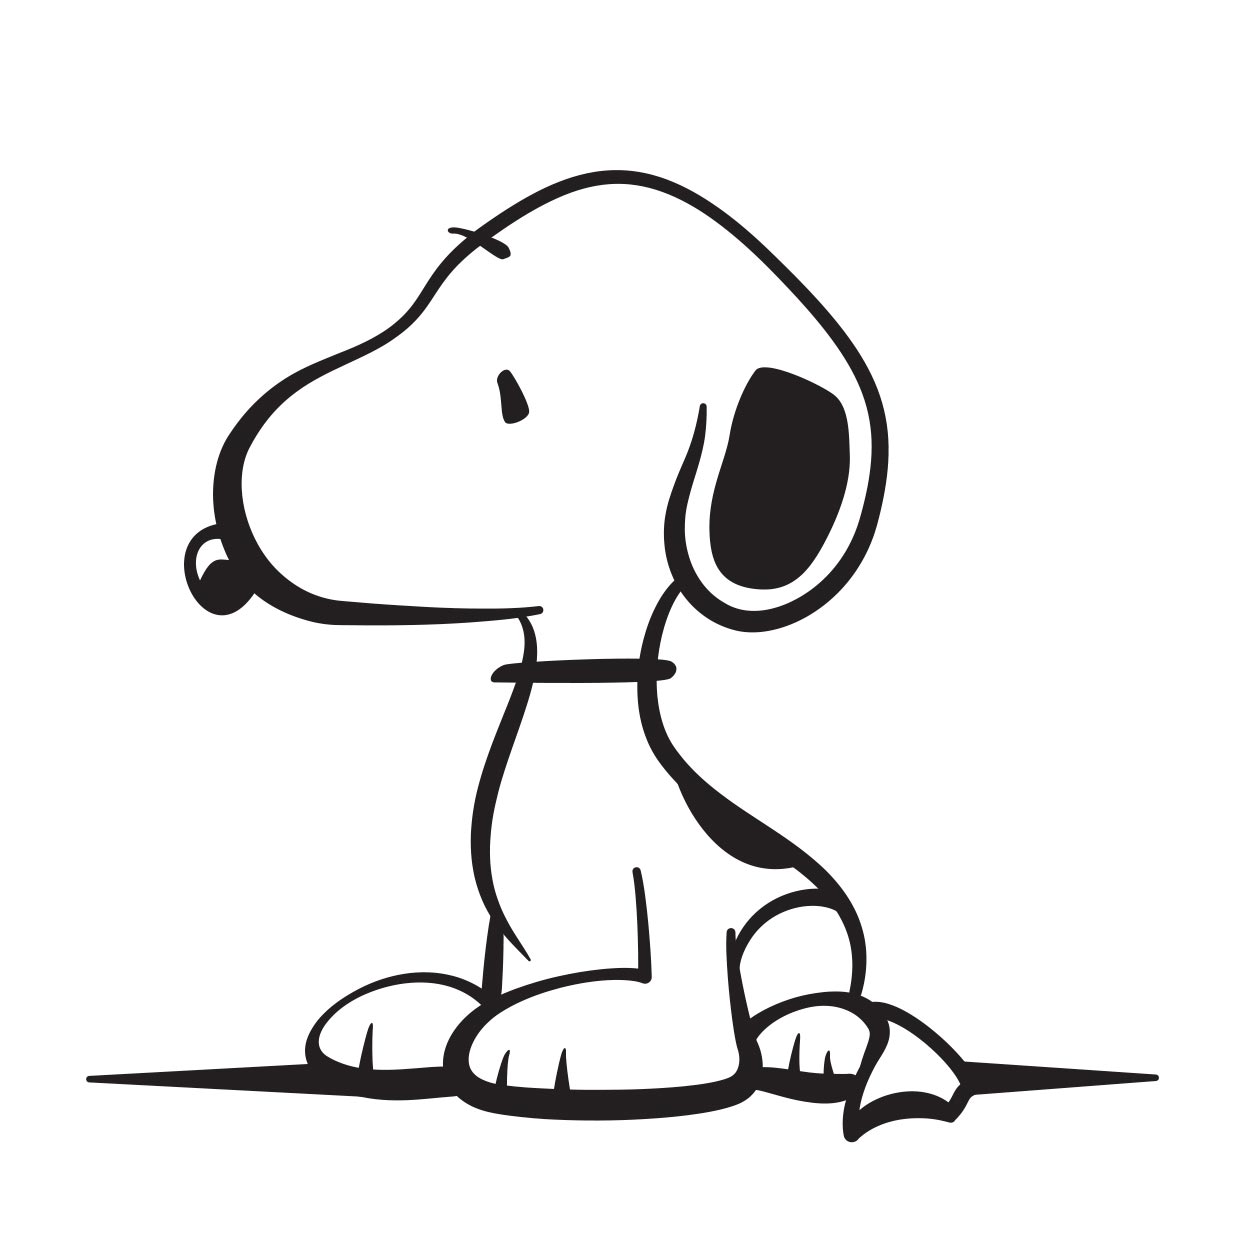 Snoopy, Charles M. Schultz - Vector Illustration by Michael Aars